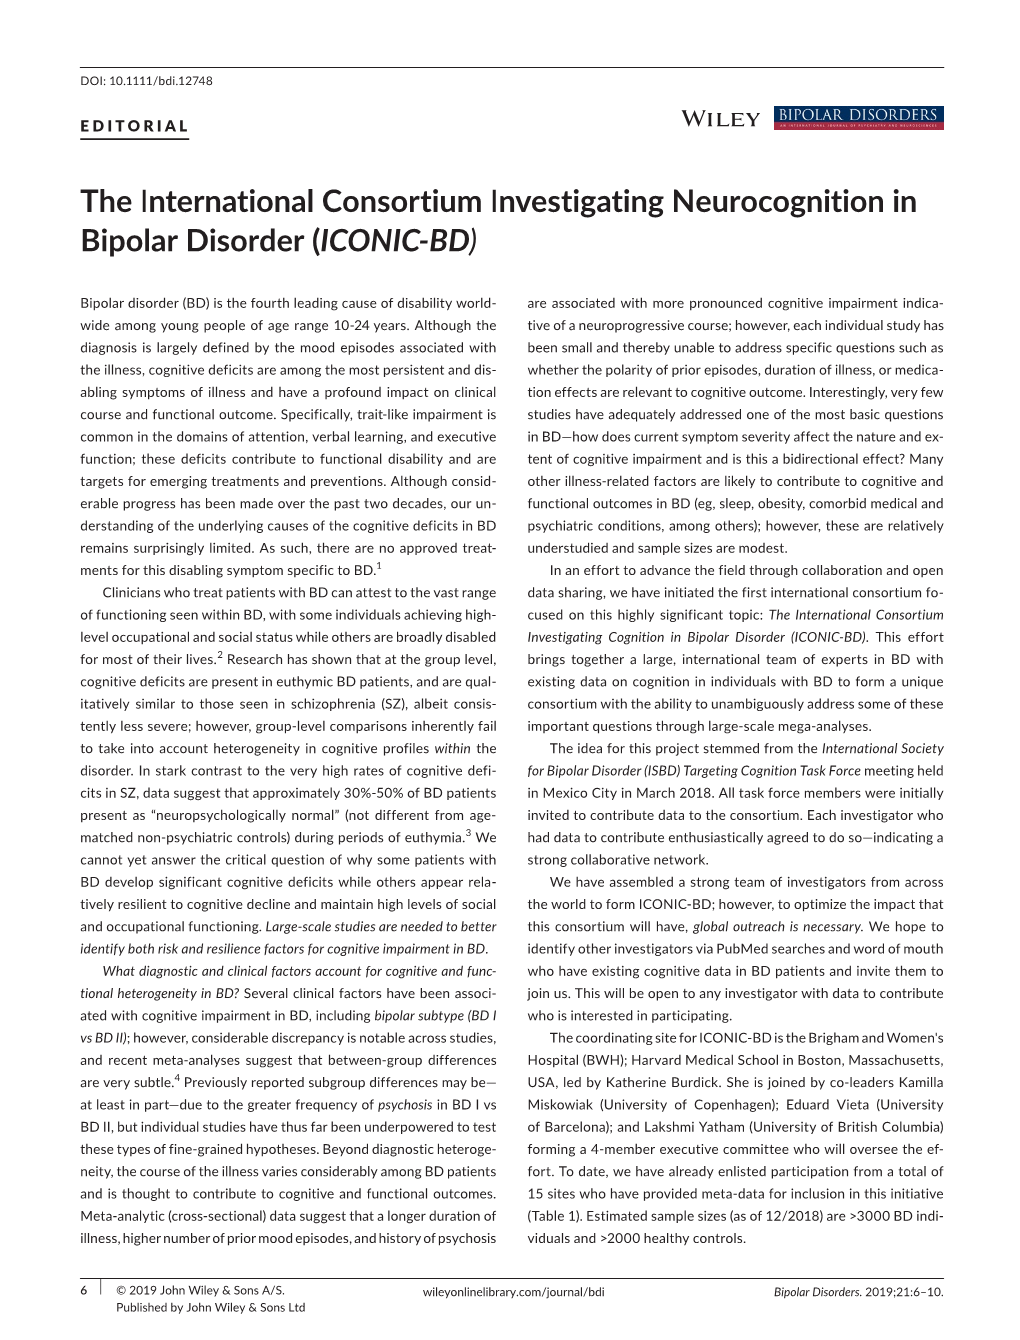 The International Consortium Investigating Neurocognition in Bipolar Disorder (ICONIC‐BD)